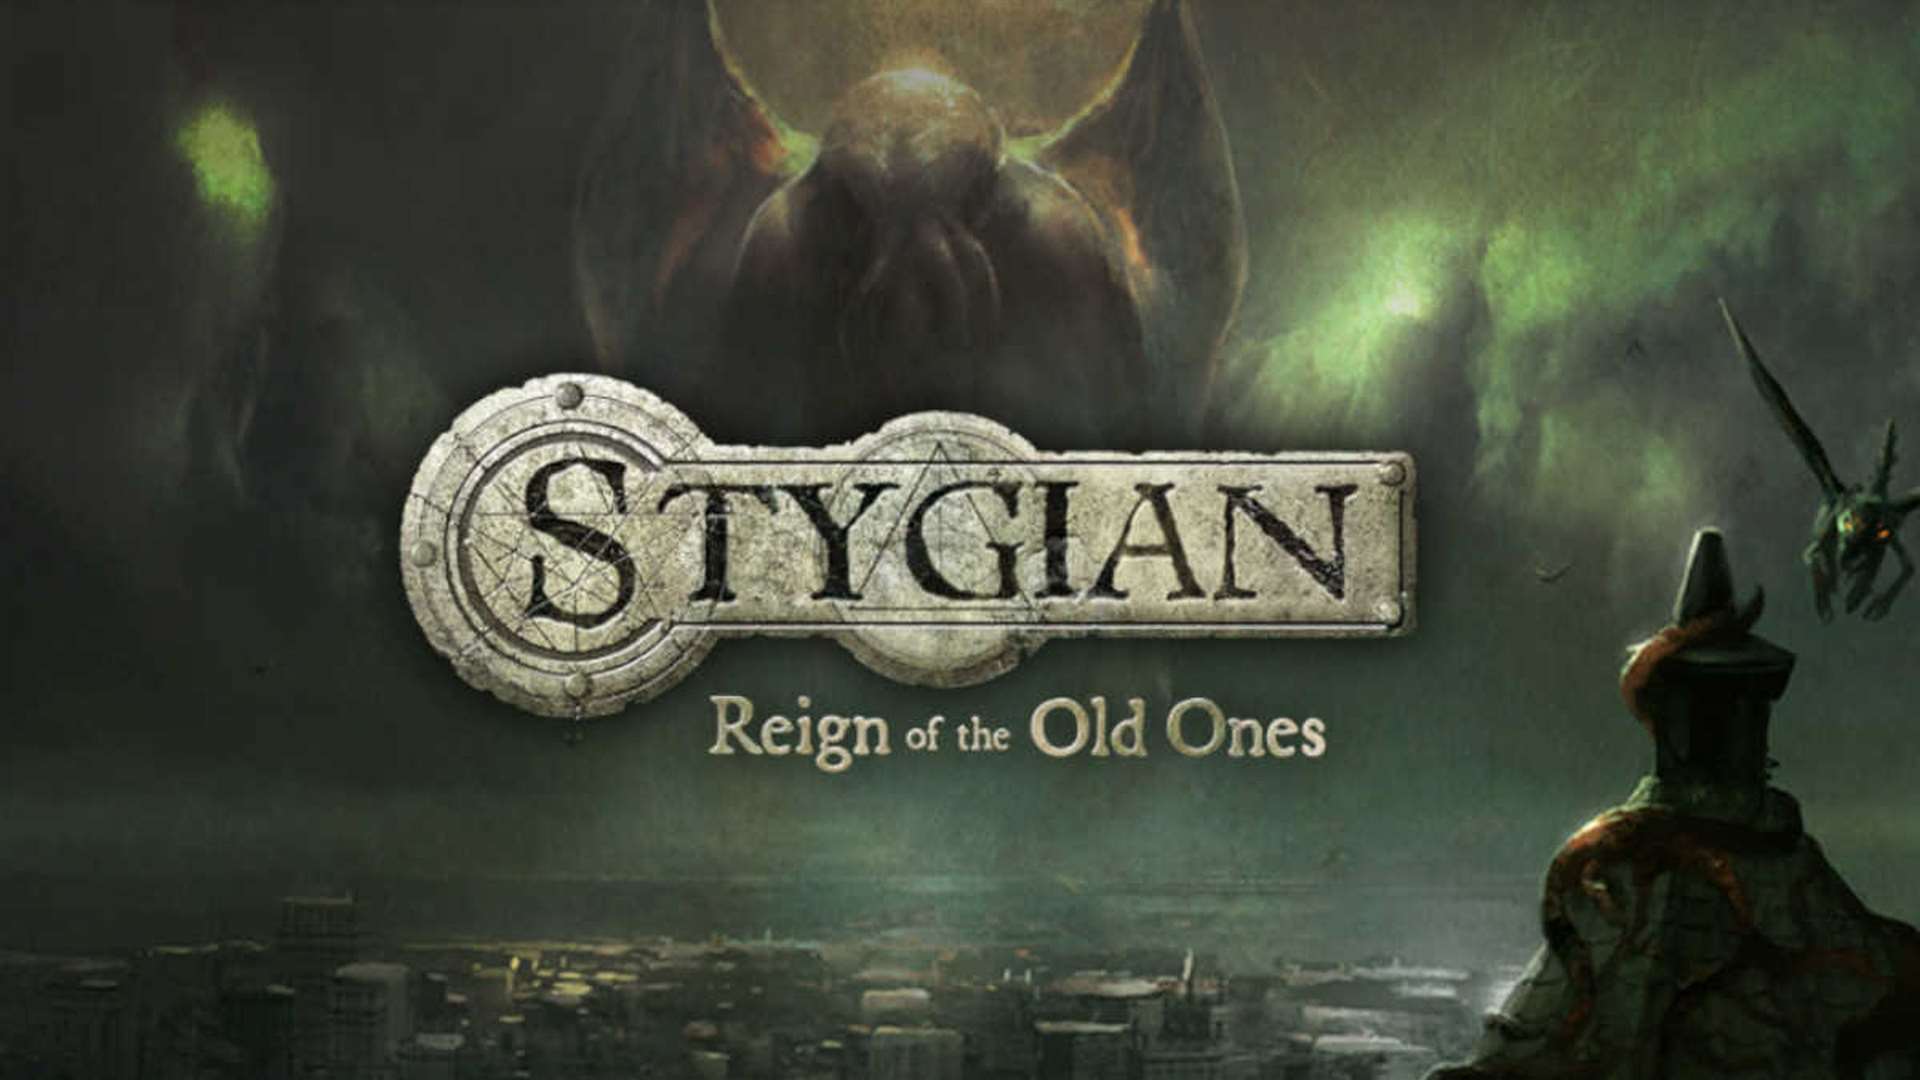 Stygian: Reign of the Old Ones. Picture: Handout/PA